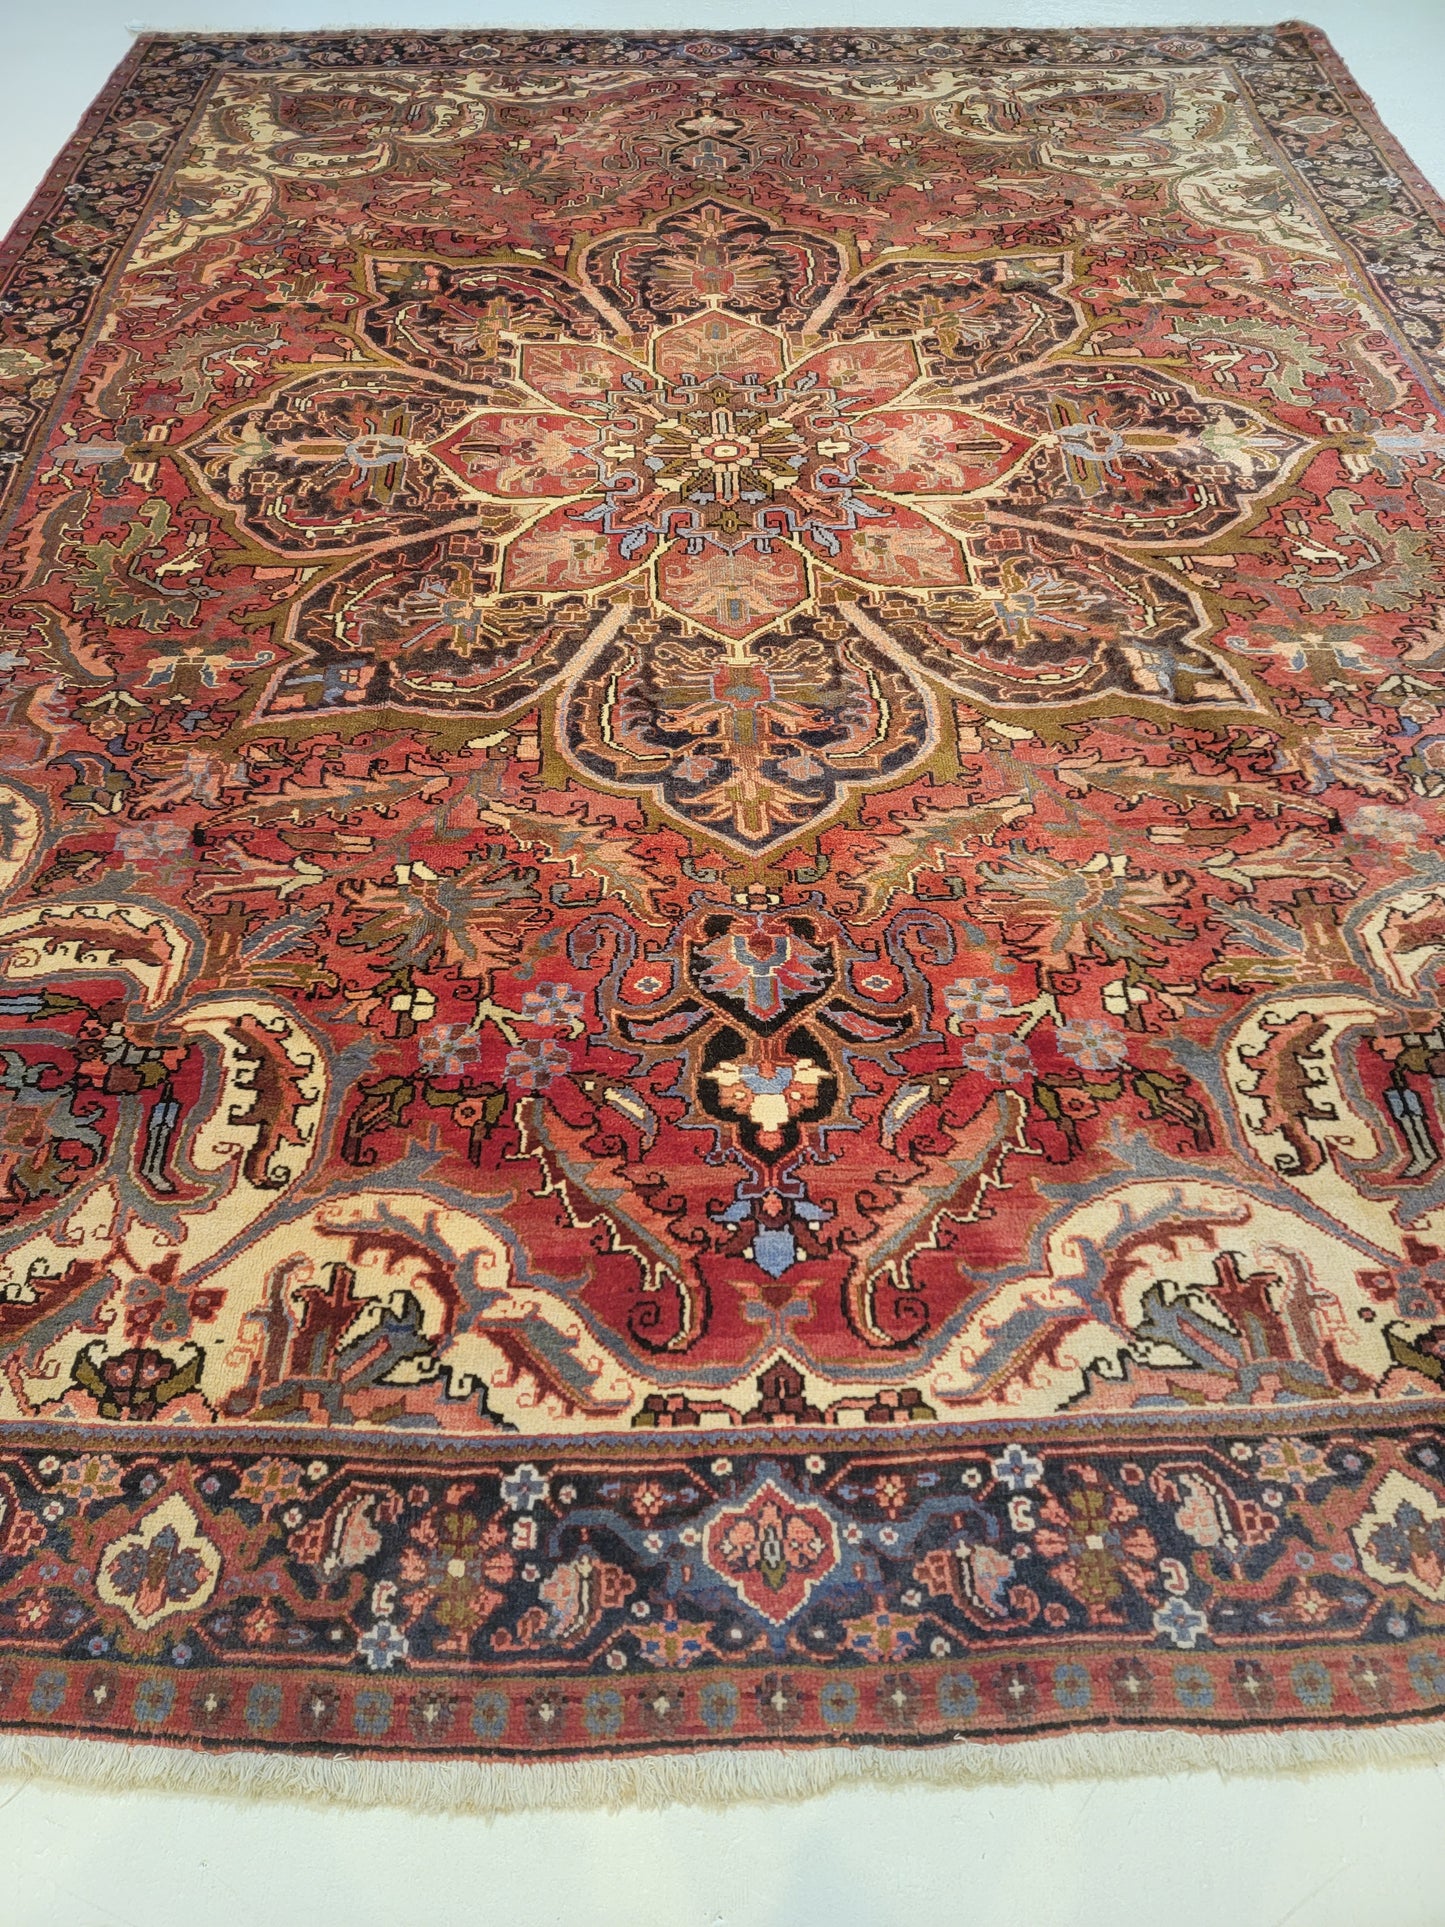 Antique Hand-Knotted Wool Area Rug Heriz 9'8" x 12'2"